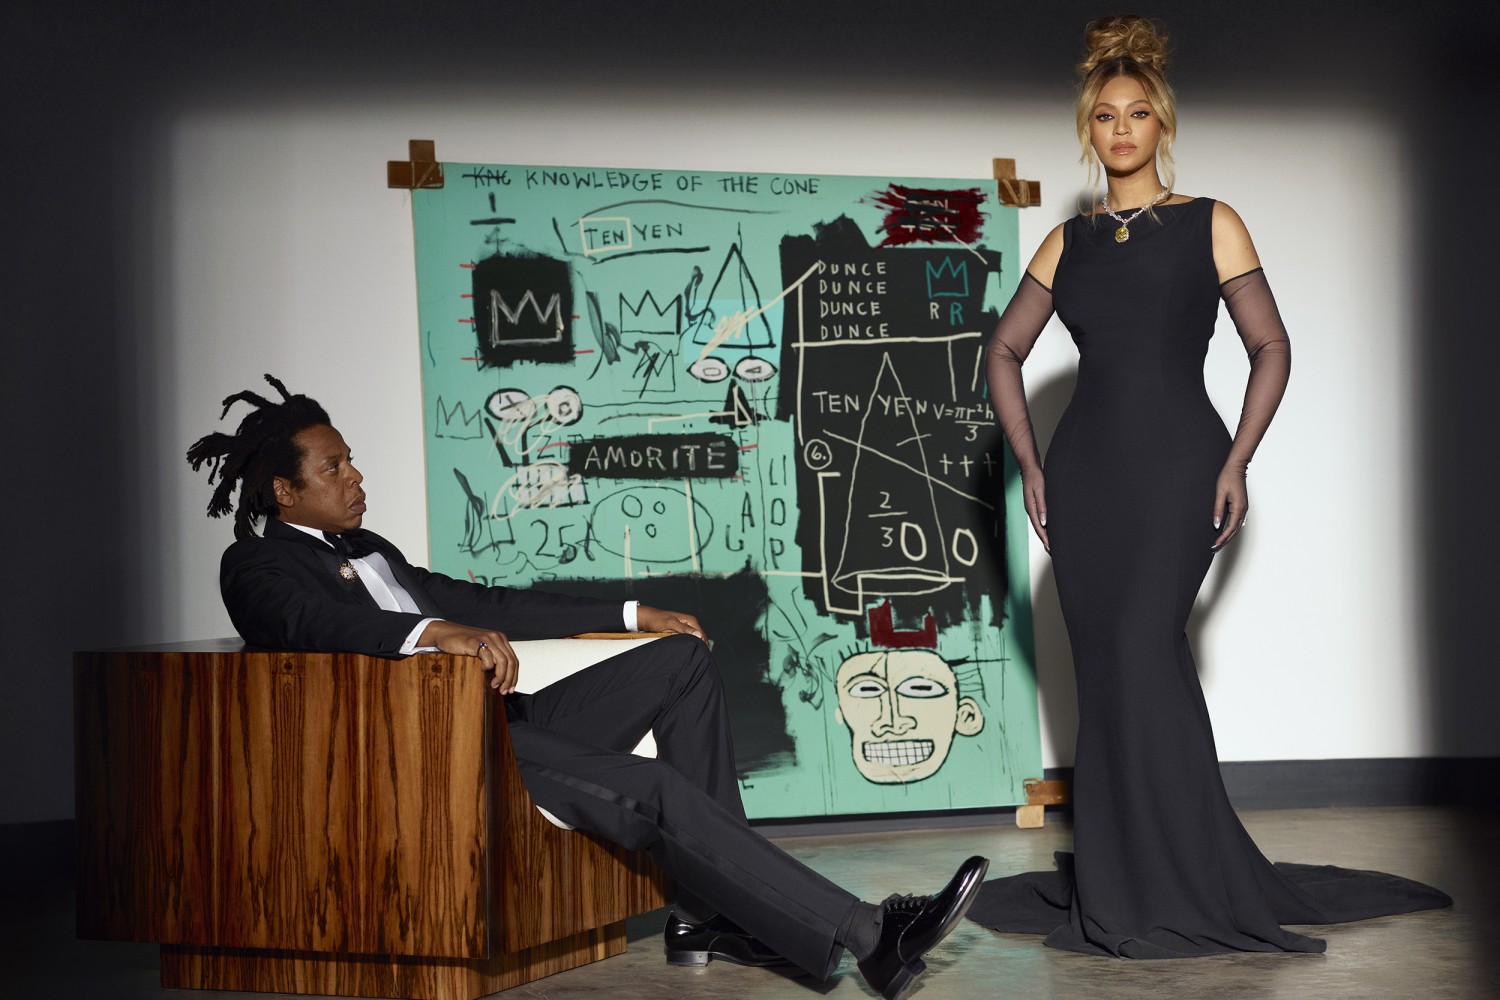 Beyoncé Stuns in New Tiffany & Co. Campaign - Fashionista